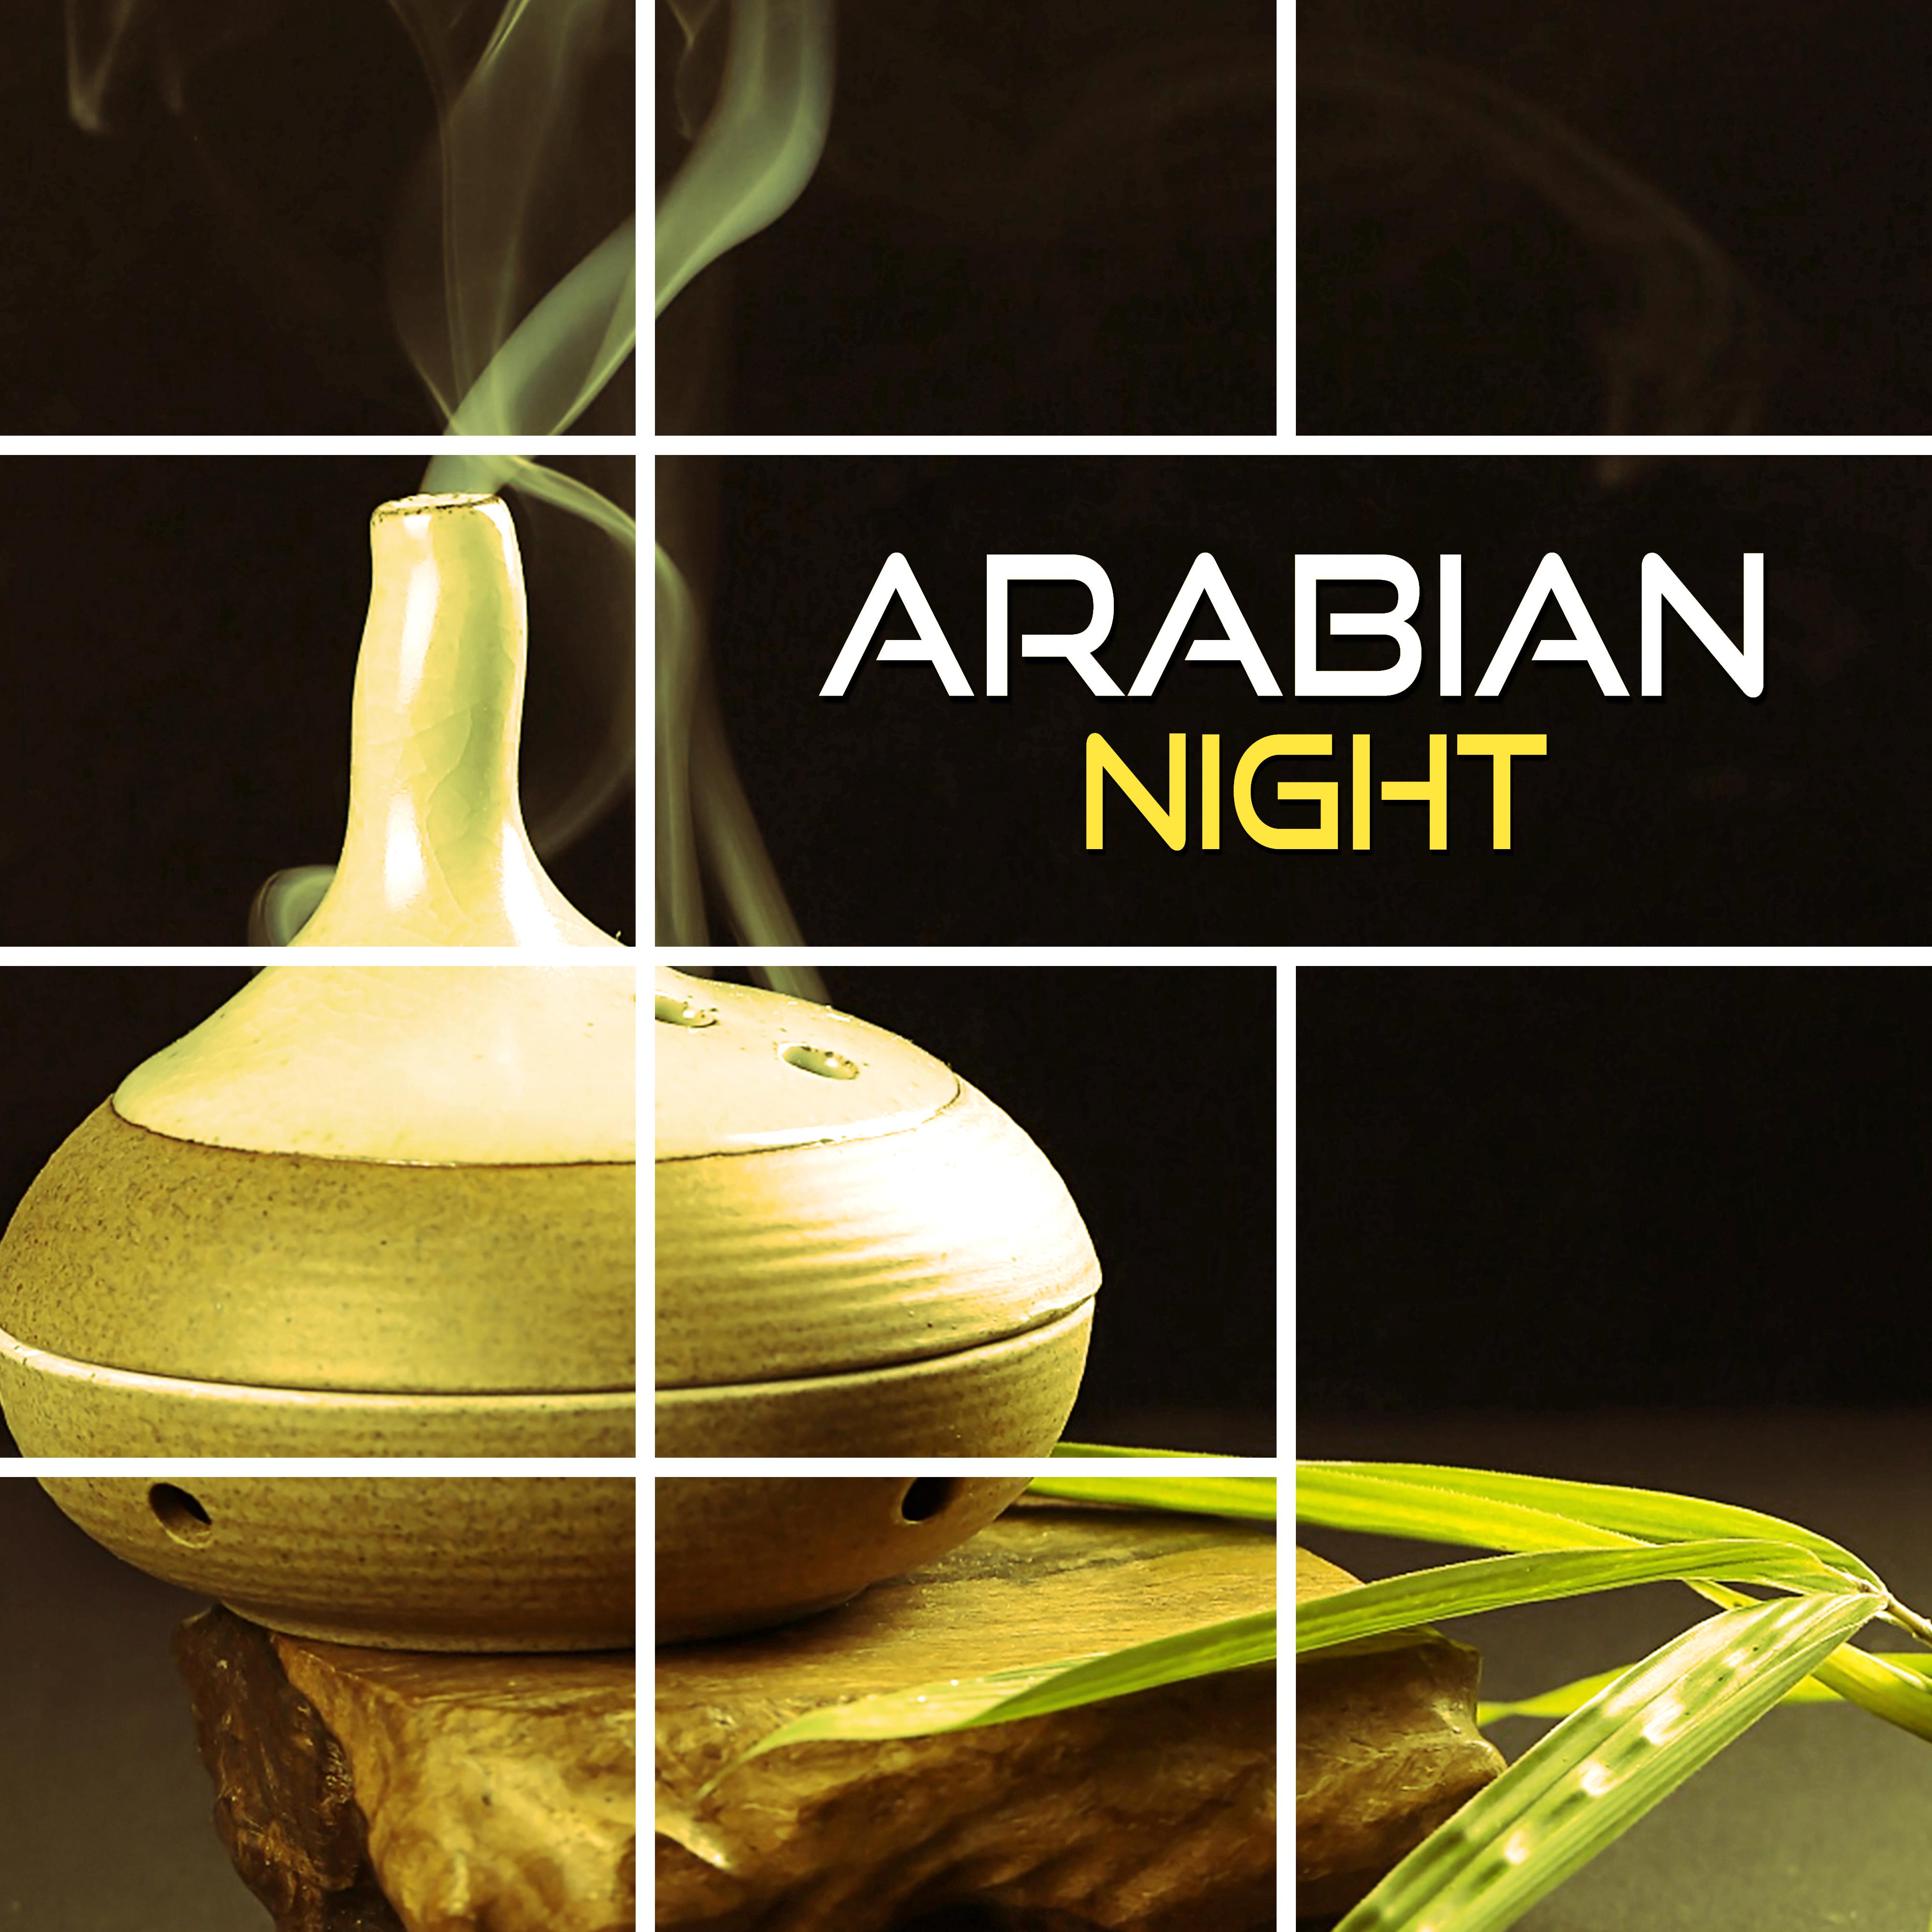 Arabian Night - Instrumental Music for Meditation, Yoga Orient Music for Massage and Chill Out, Buddha Lounge del Mar